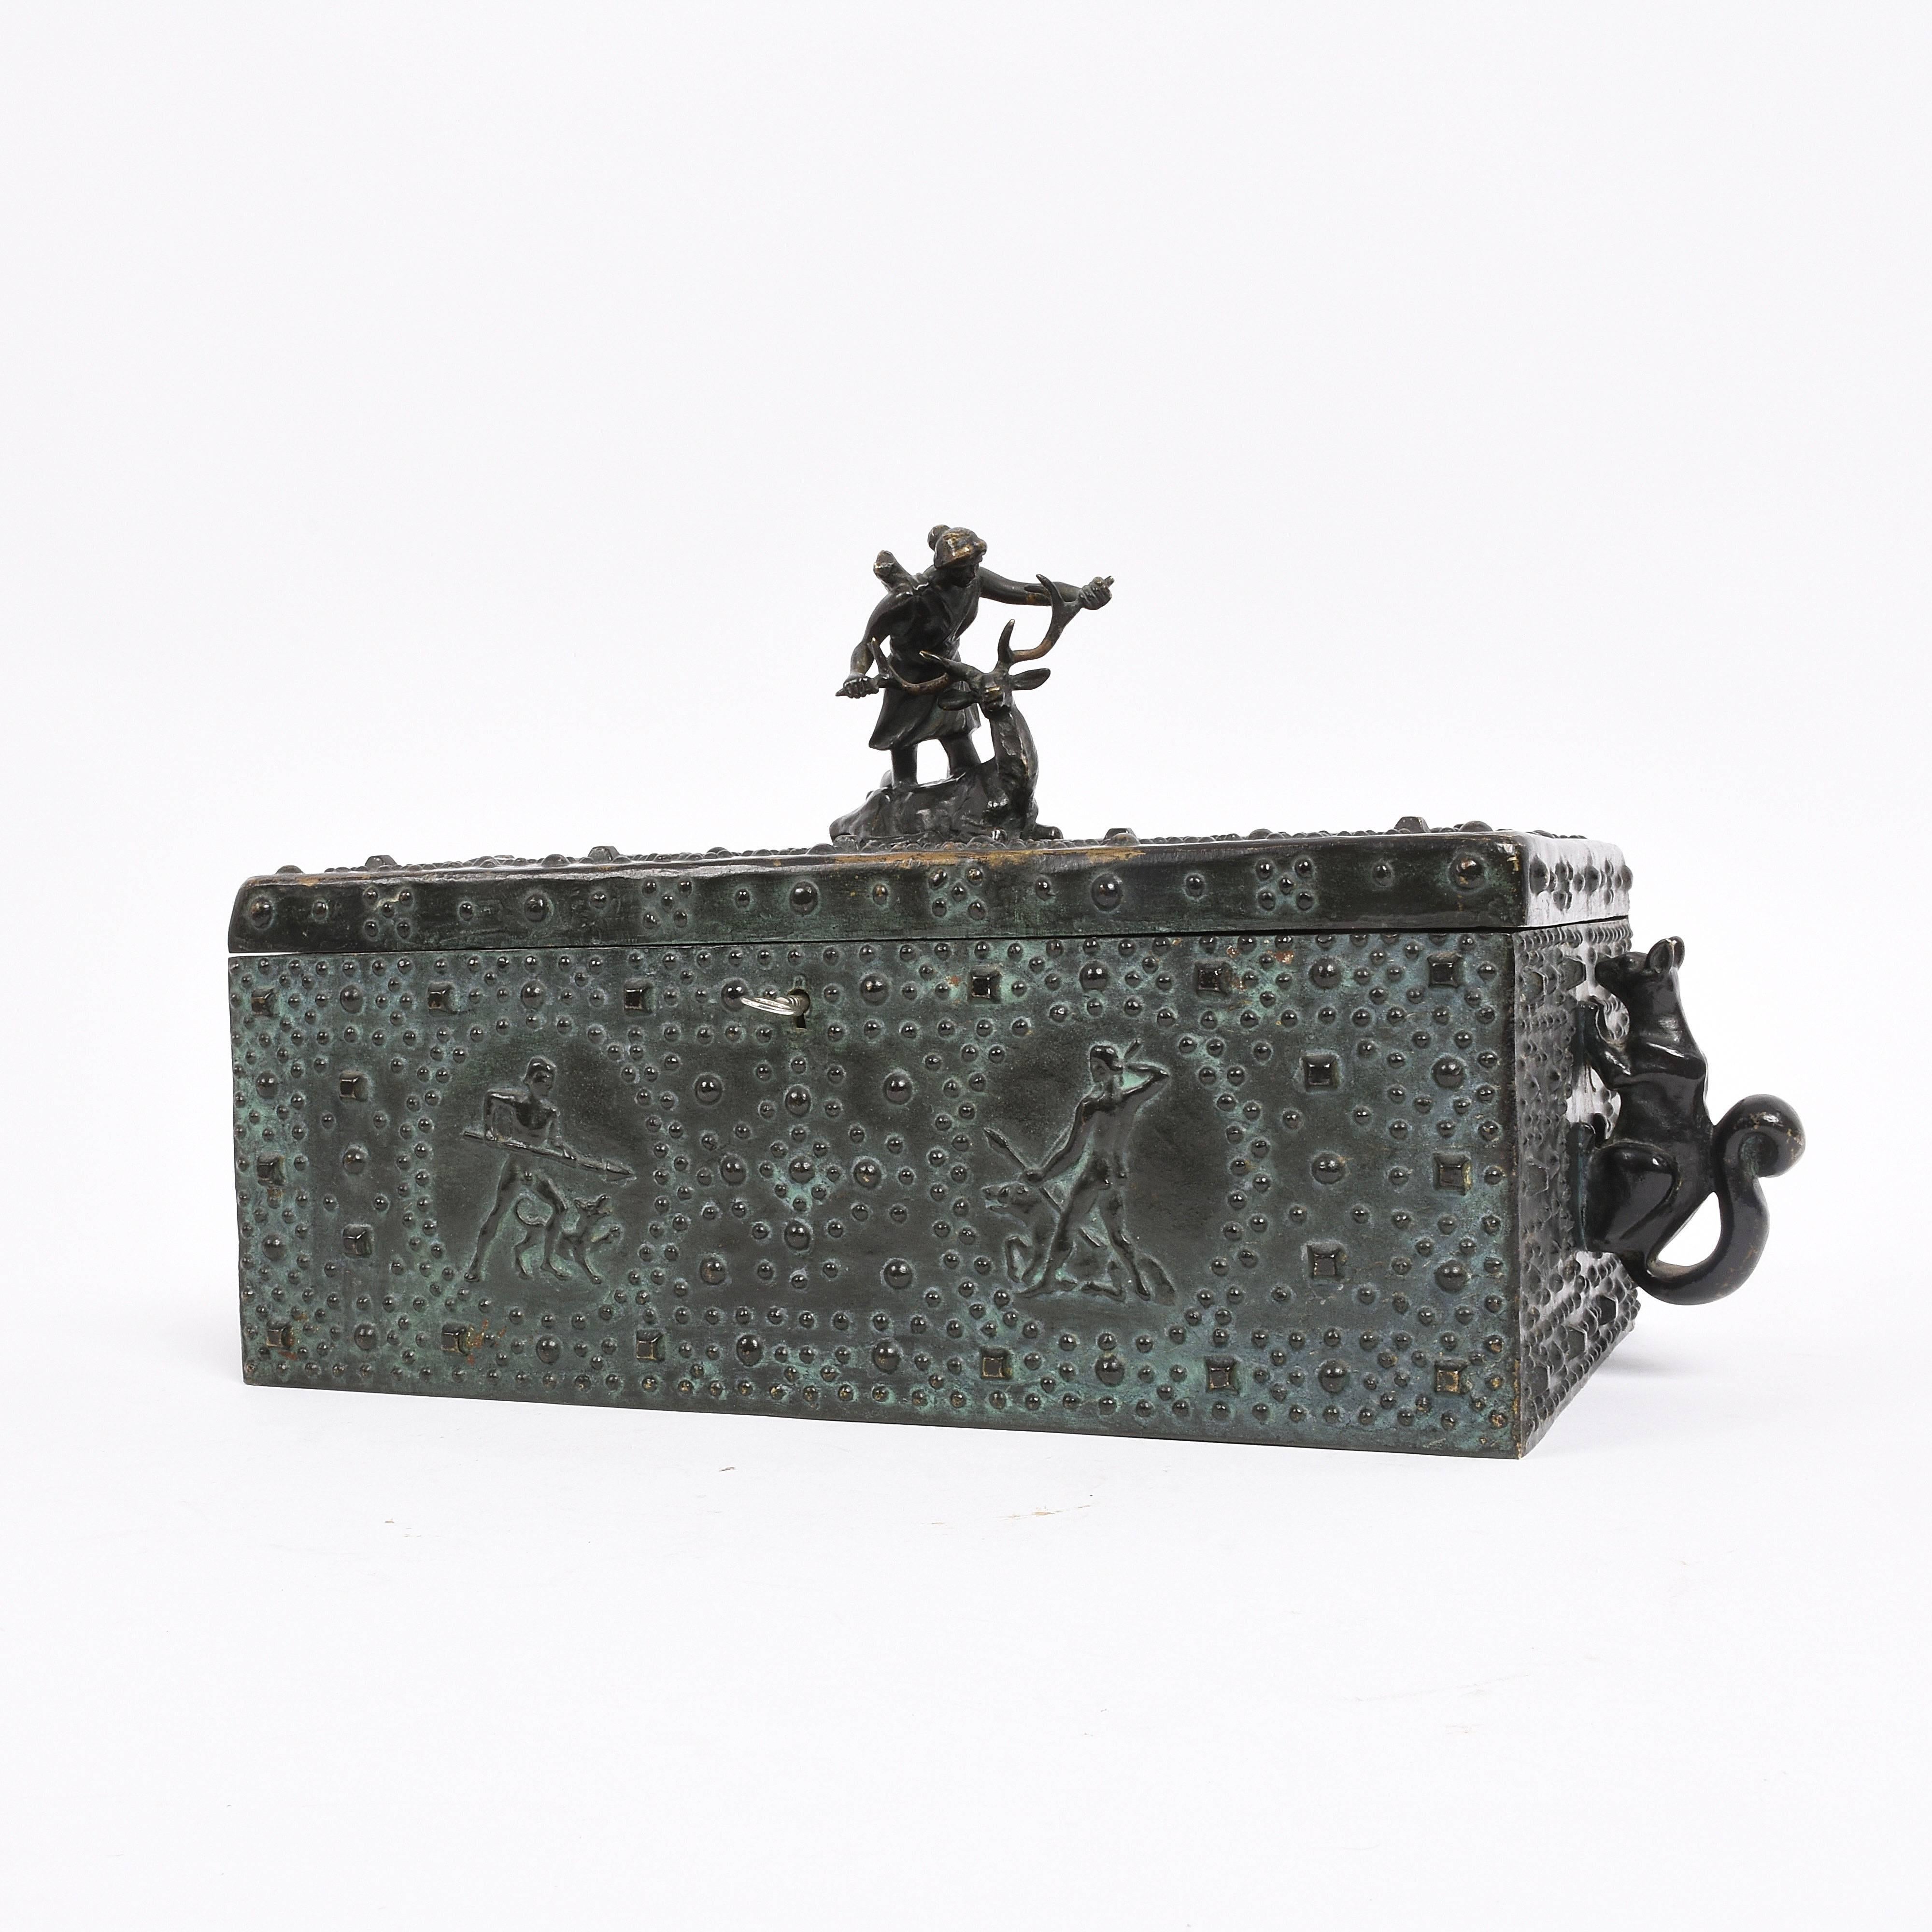 Hand-Crafted Bronze Chest from the Early 1900, Signed Friedrich Gornik, Austria, 1877-1943